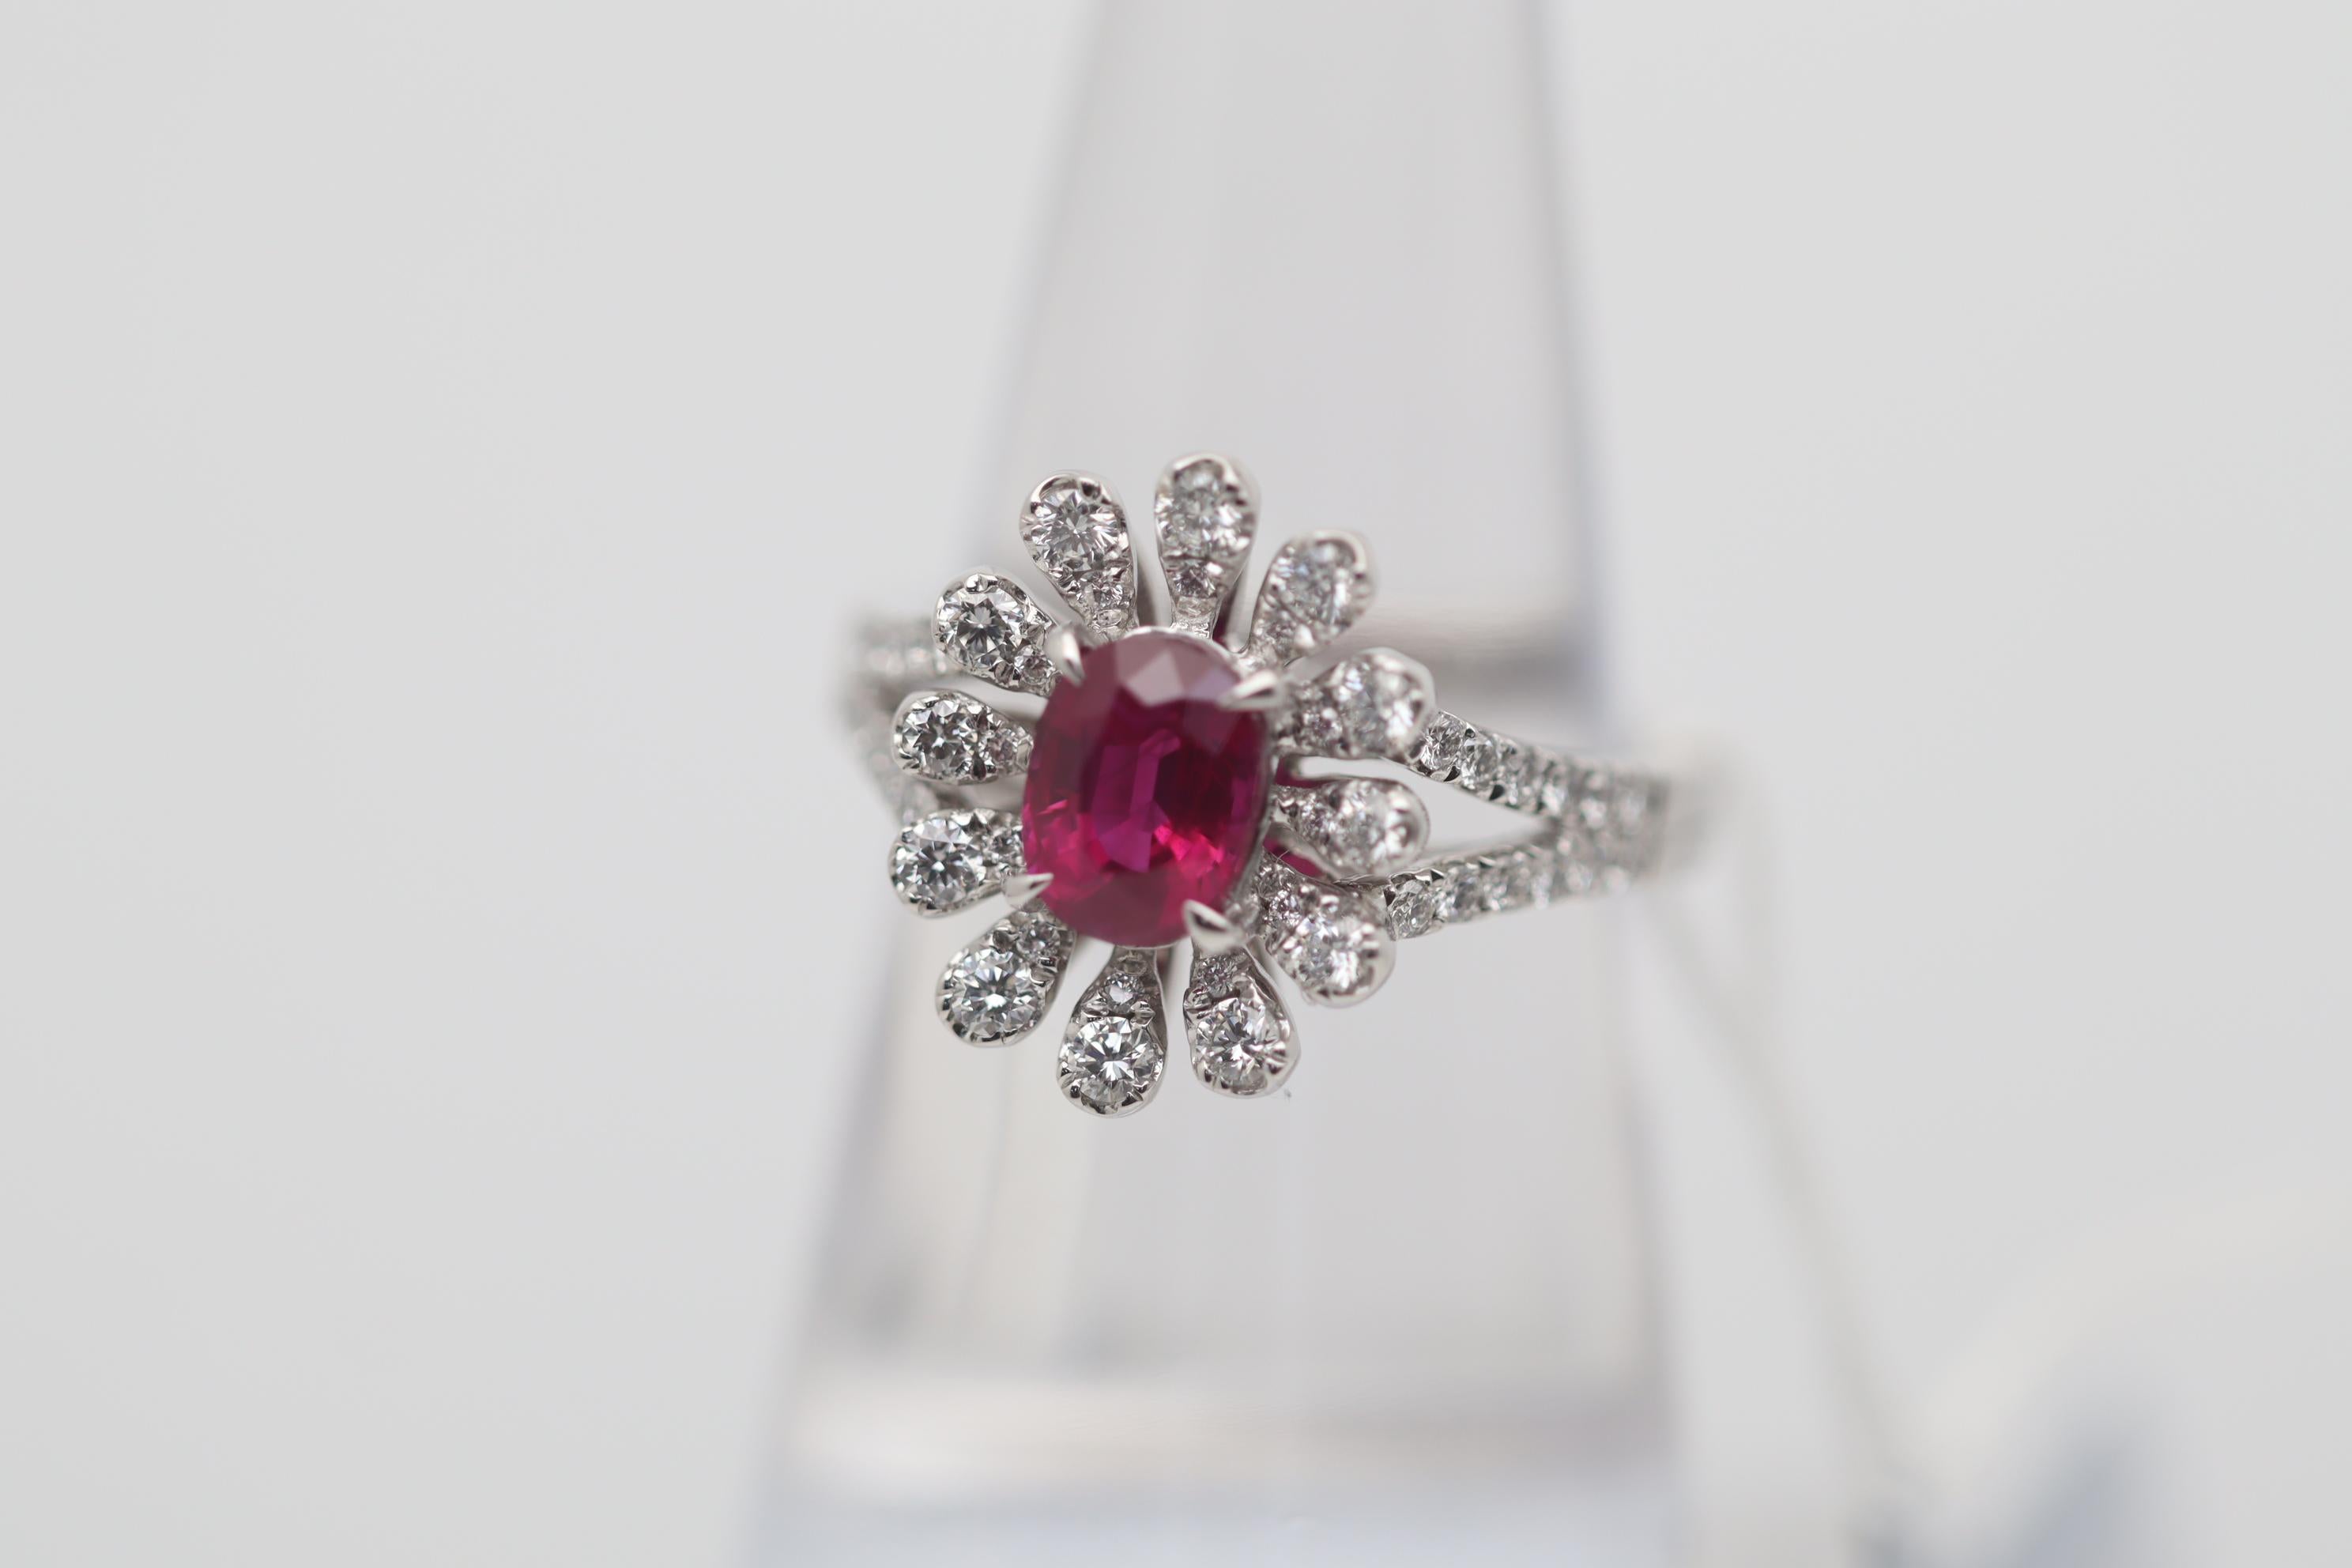 Oval Cut 1.37 Carat Burmese Ruby Diamond Platinum Flower Ring, GIA Certified For Sale